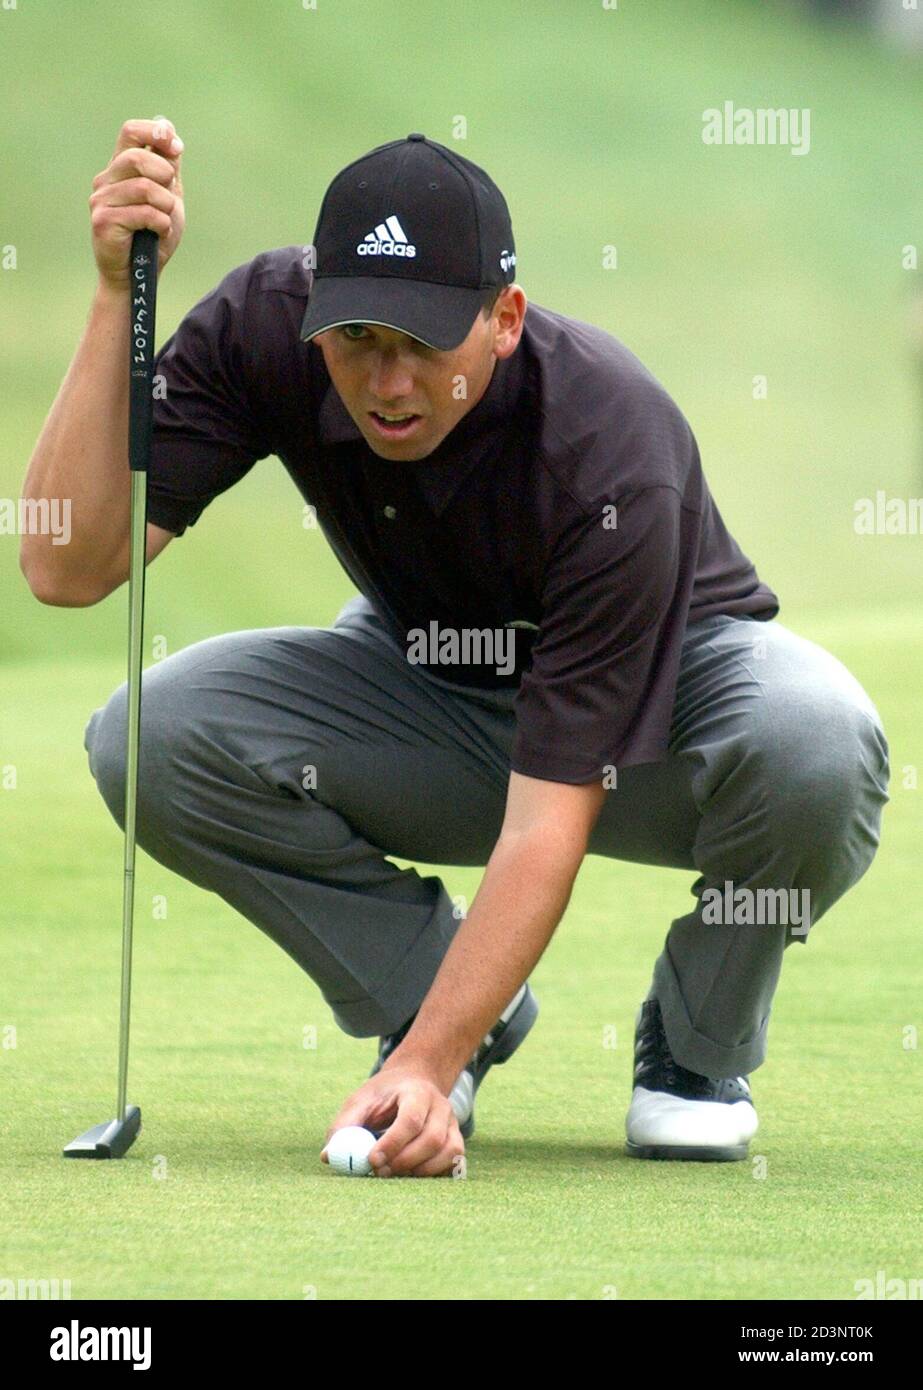 Sergio Garcia of Spain lines up a putt during the second round of the  European Masters golf tournament in Crans-sur-Sierre, Switzerland,  September 5, 2003. Garcias places thirteenth after the second round with